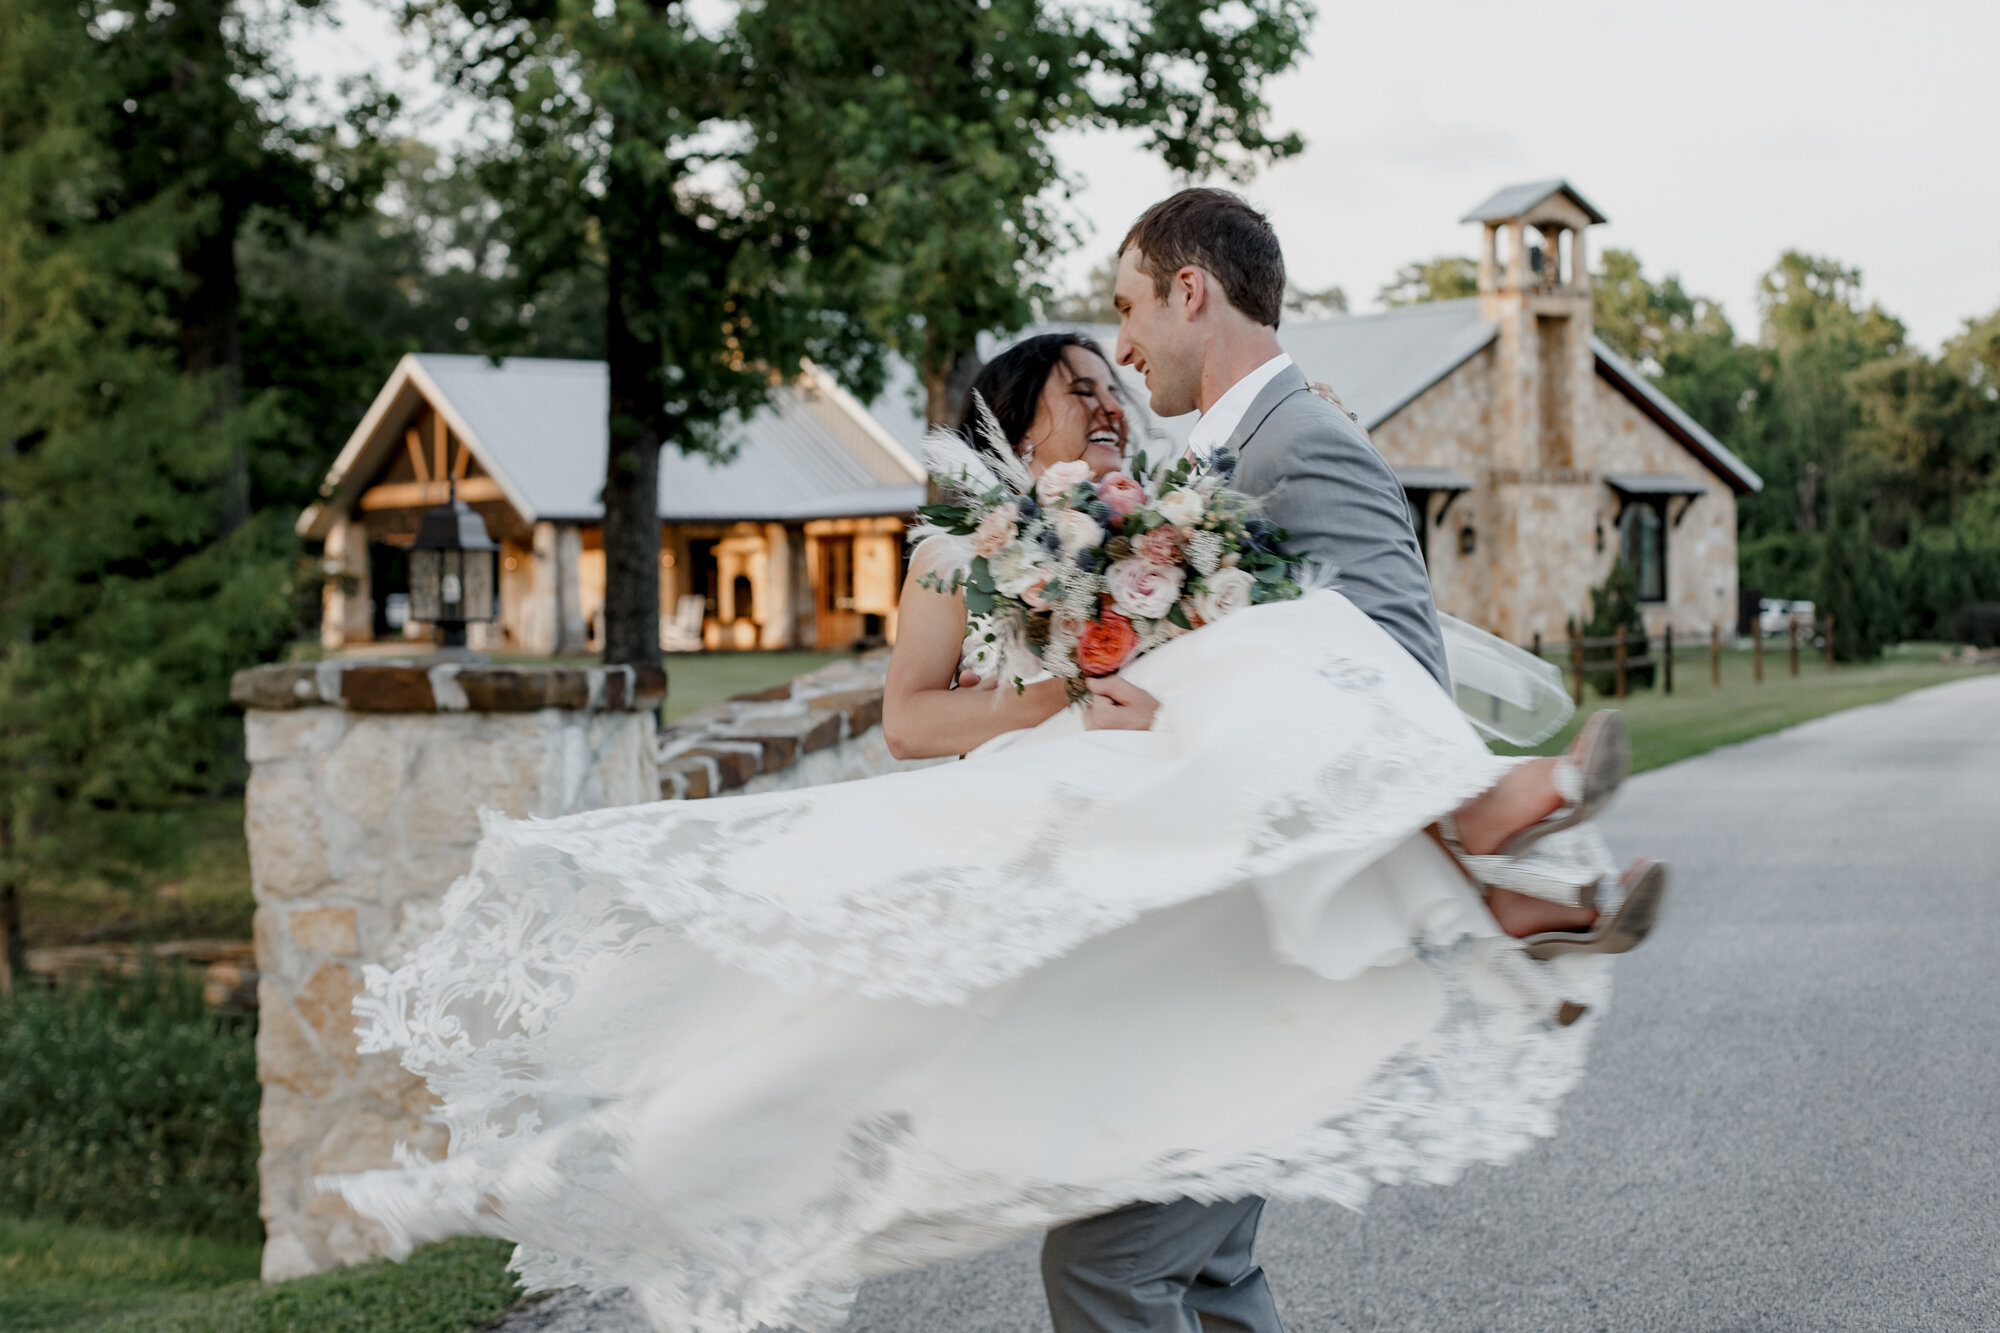 Groom holding bride and spinning. Romantic Chic Country Wedding at Rustic Luxury Balmorhea Events&nbsp;Venue in Magnolia, TX